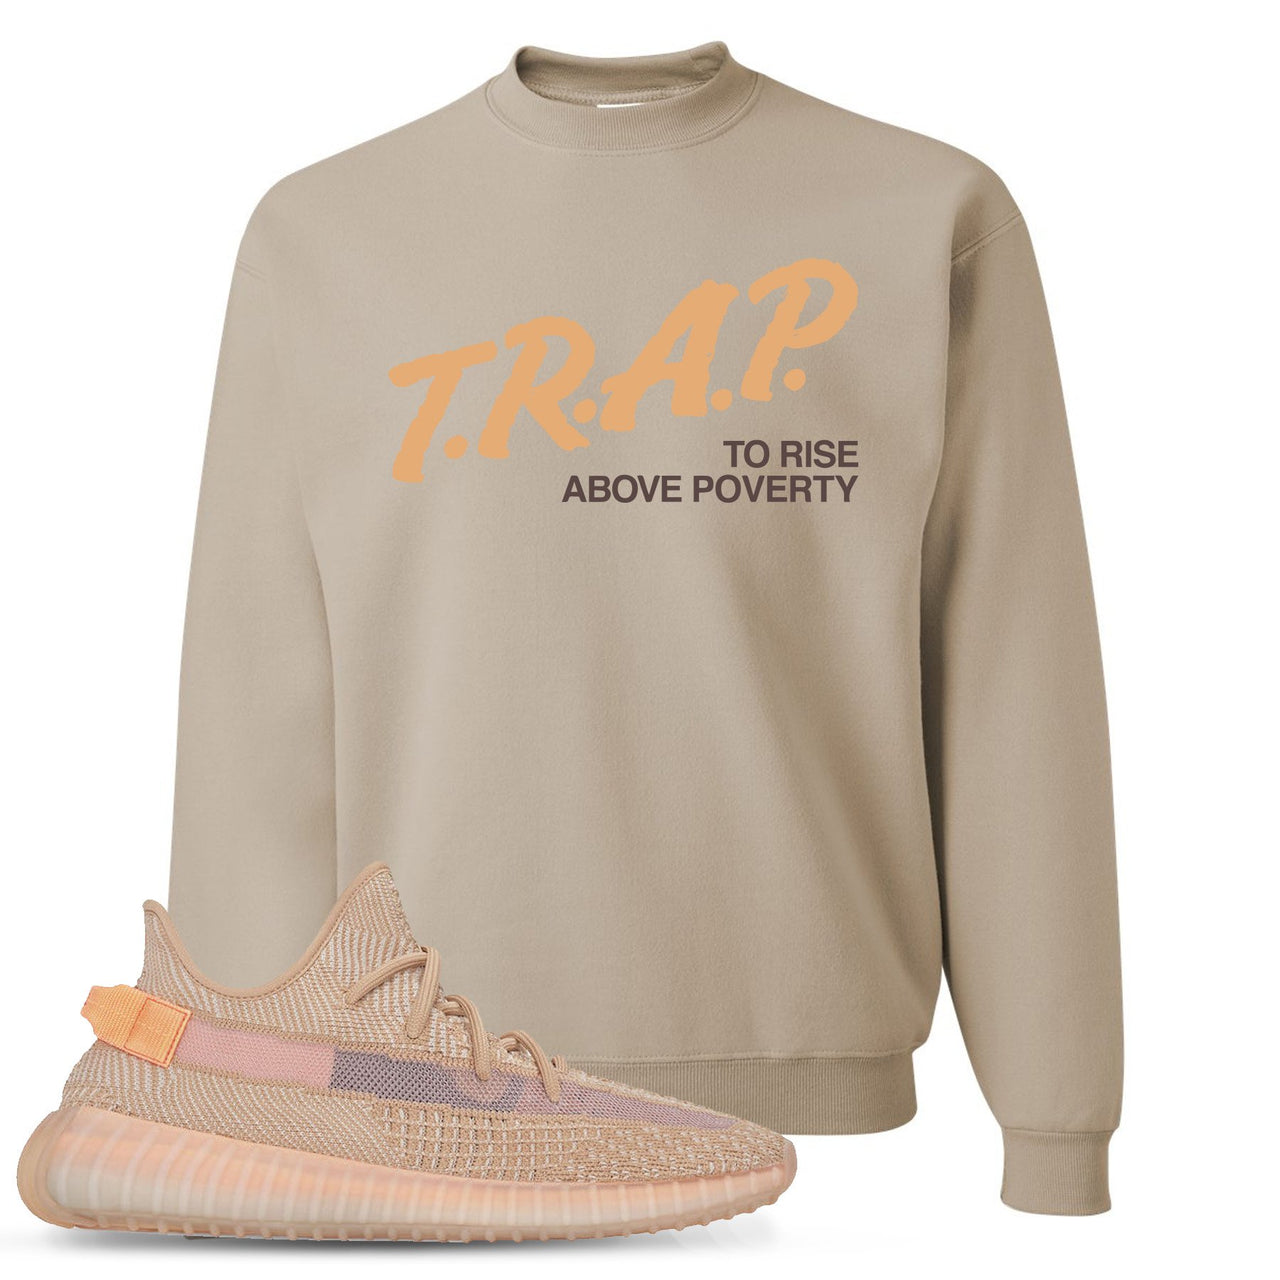 Clay v2 350s Crewneck Sweater | Trap To Rise Above Poverty, Sand